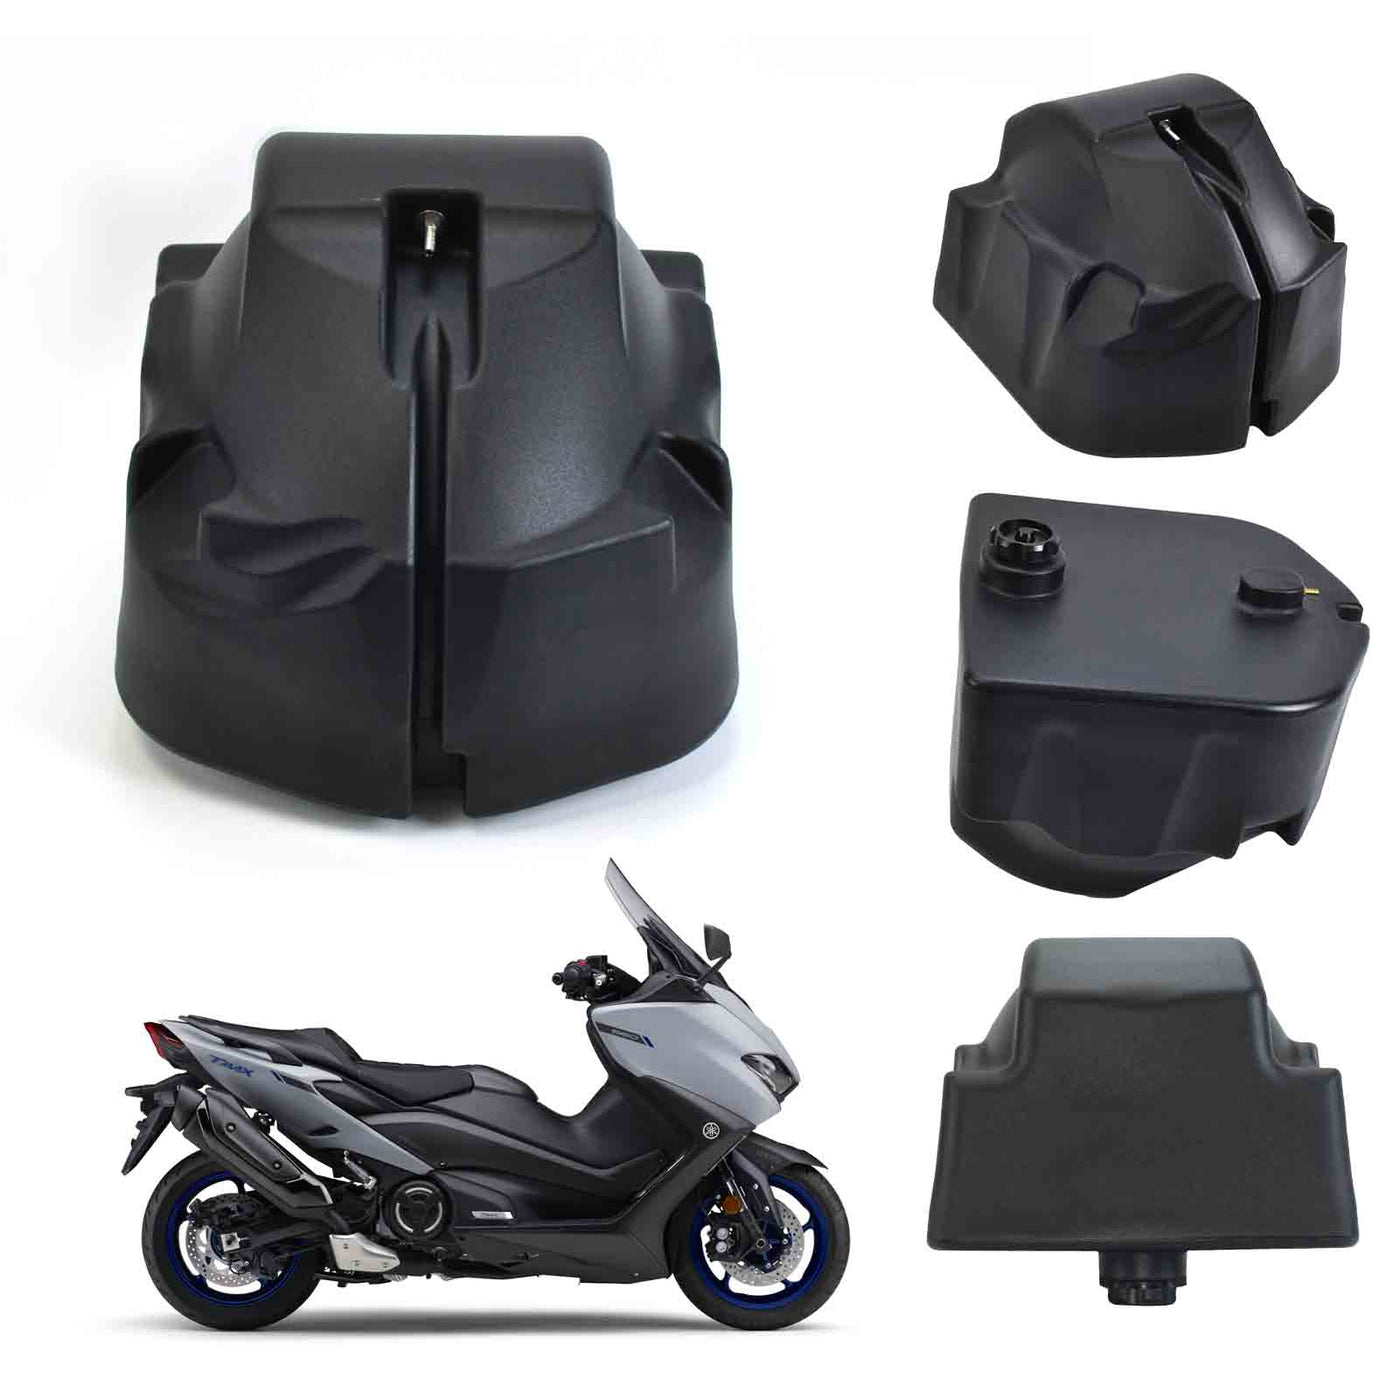 YAMAHA Motorcycle Auxiliary Fuel Tank Made of PE Material for Yamaha TMAX Tech Max From Year 2019-2022 TMAX560 (12.6x11.8x10.2 inches, 10L) Year 2023 TMAX 560/Year From 2018 TMAX 530 Please Contact Us First